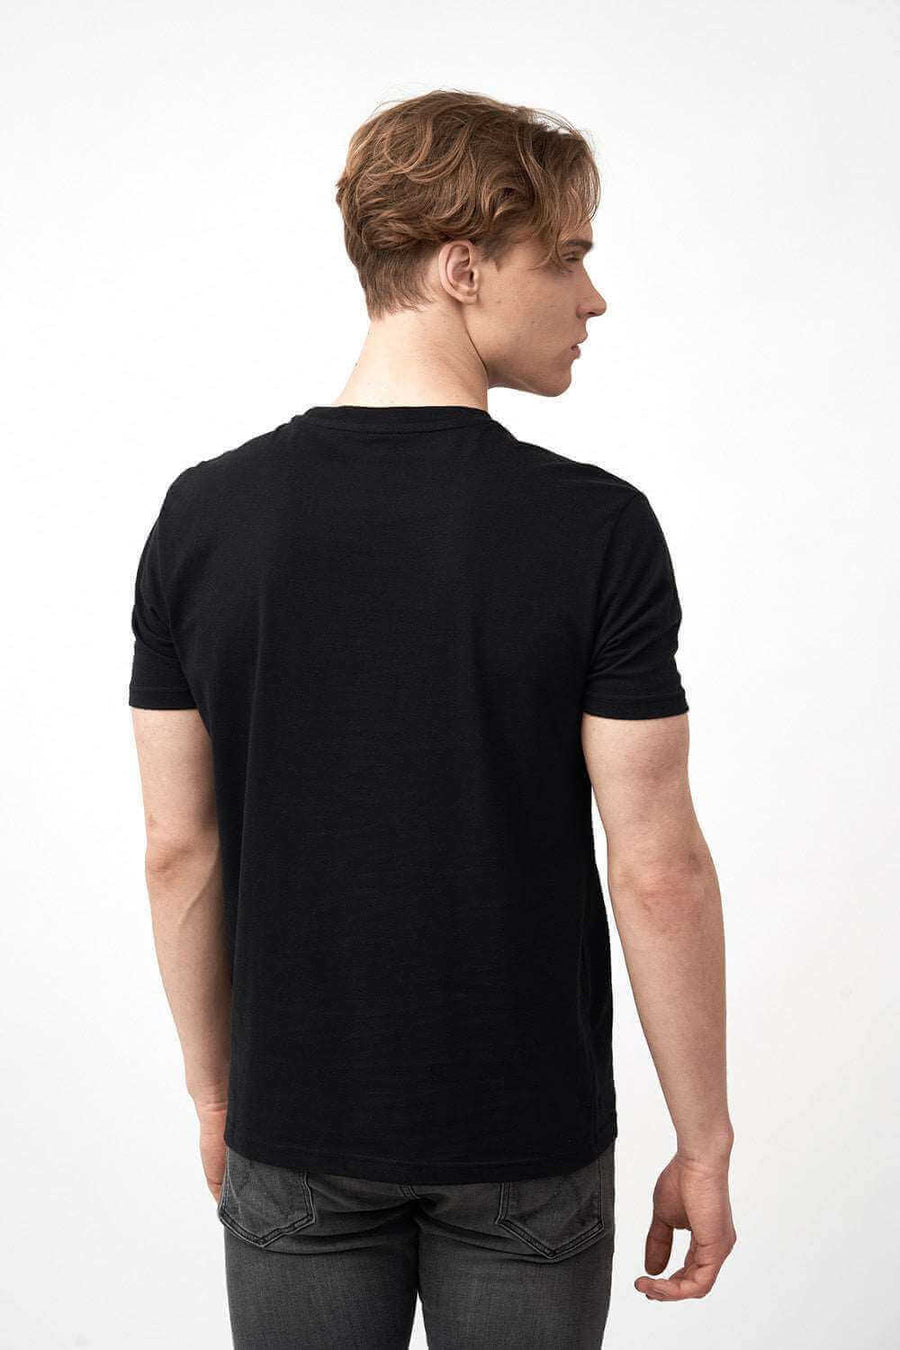 Back View of Men's Short Sleeve Shirts in Black with Logo Print